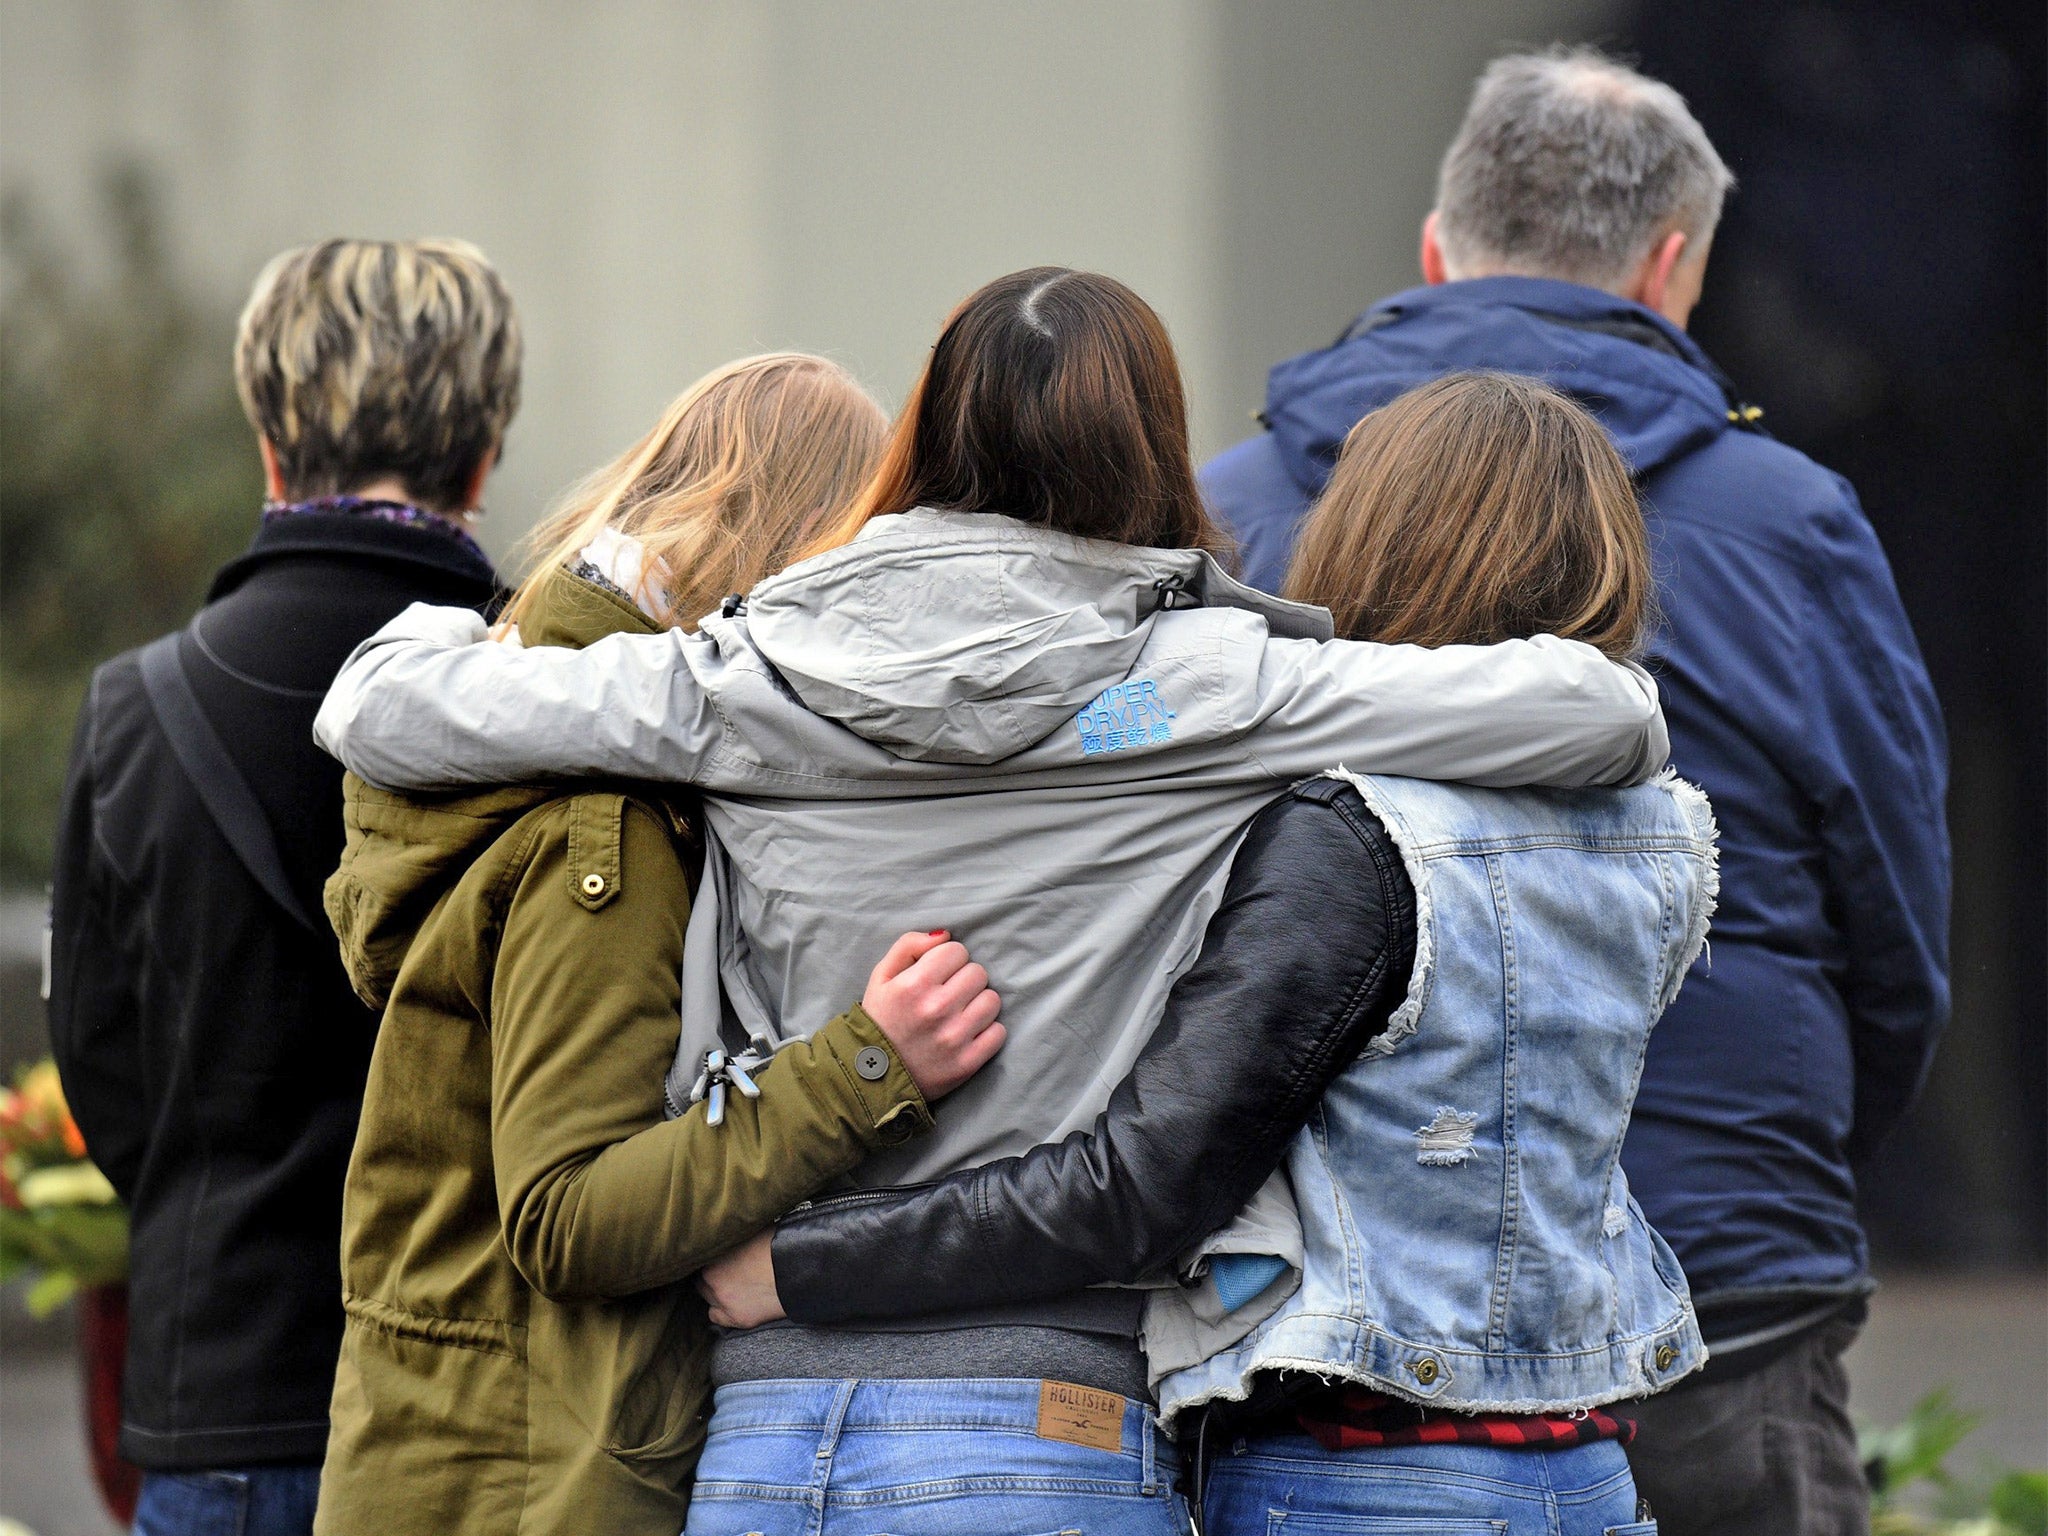 Students gather at a memorial in front of the Joseph-Koenig-Gymnasium school in Haltern am See